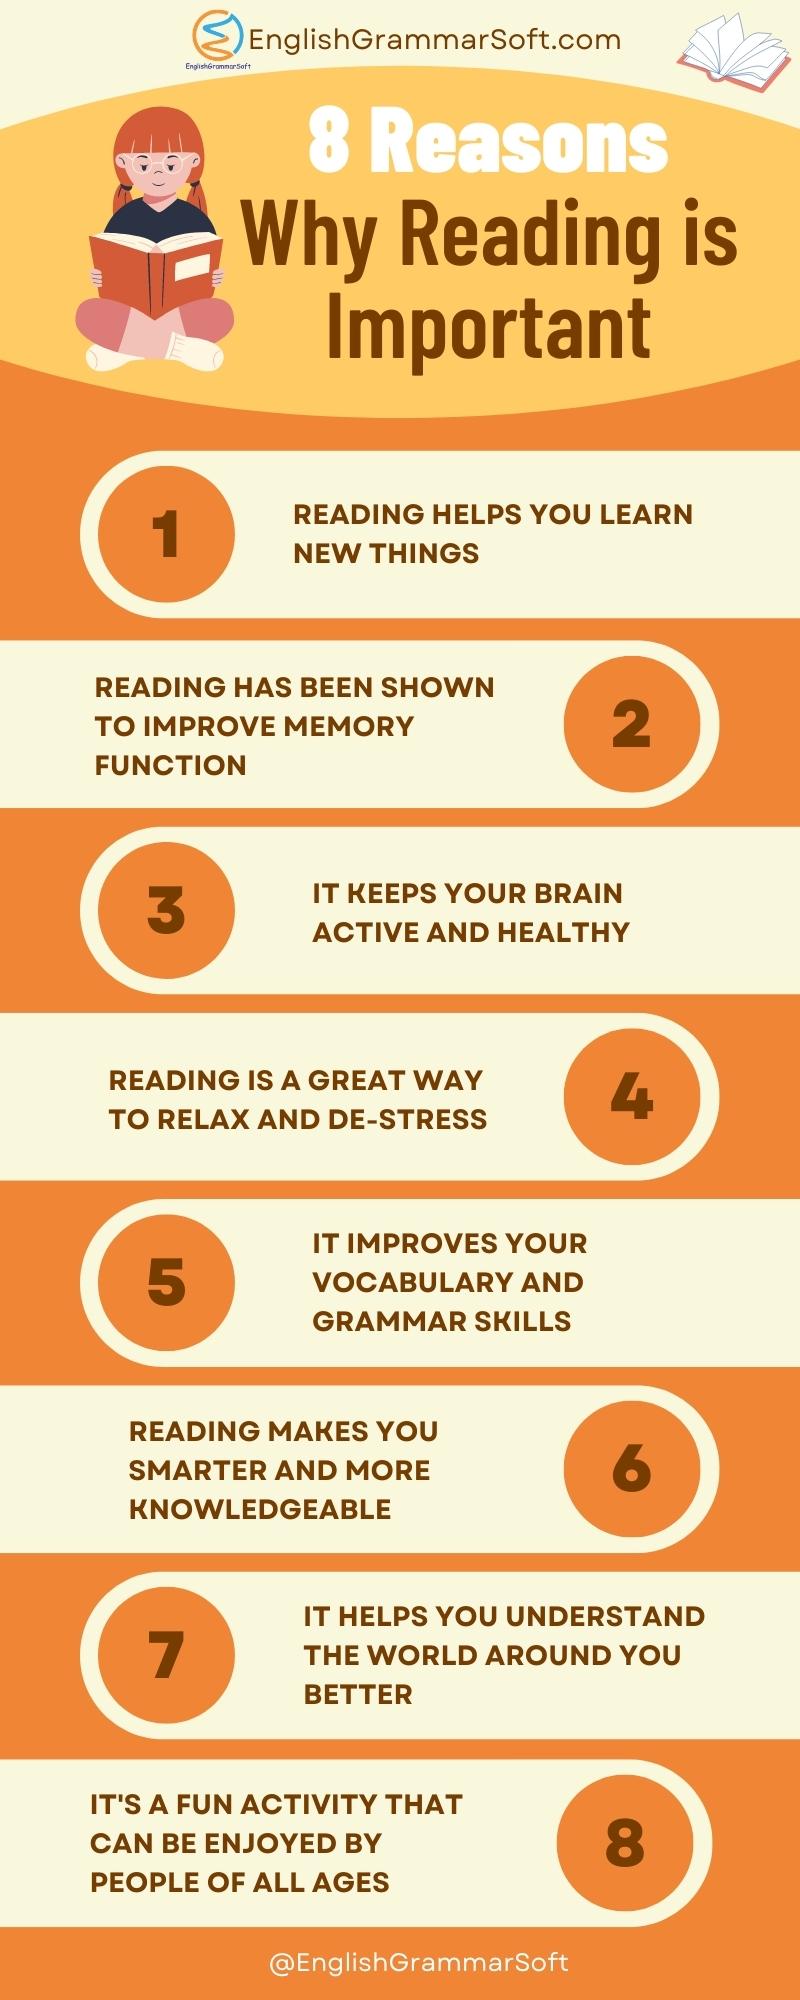 8 Reasons Why Reading is Important